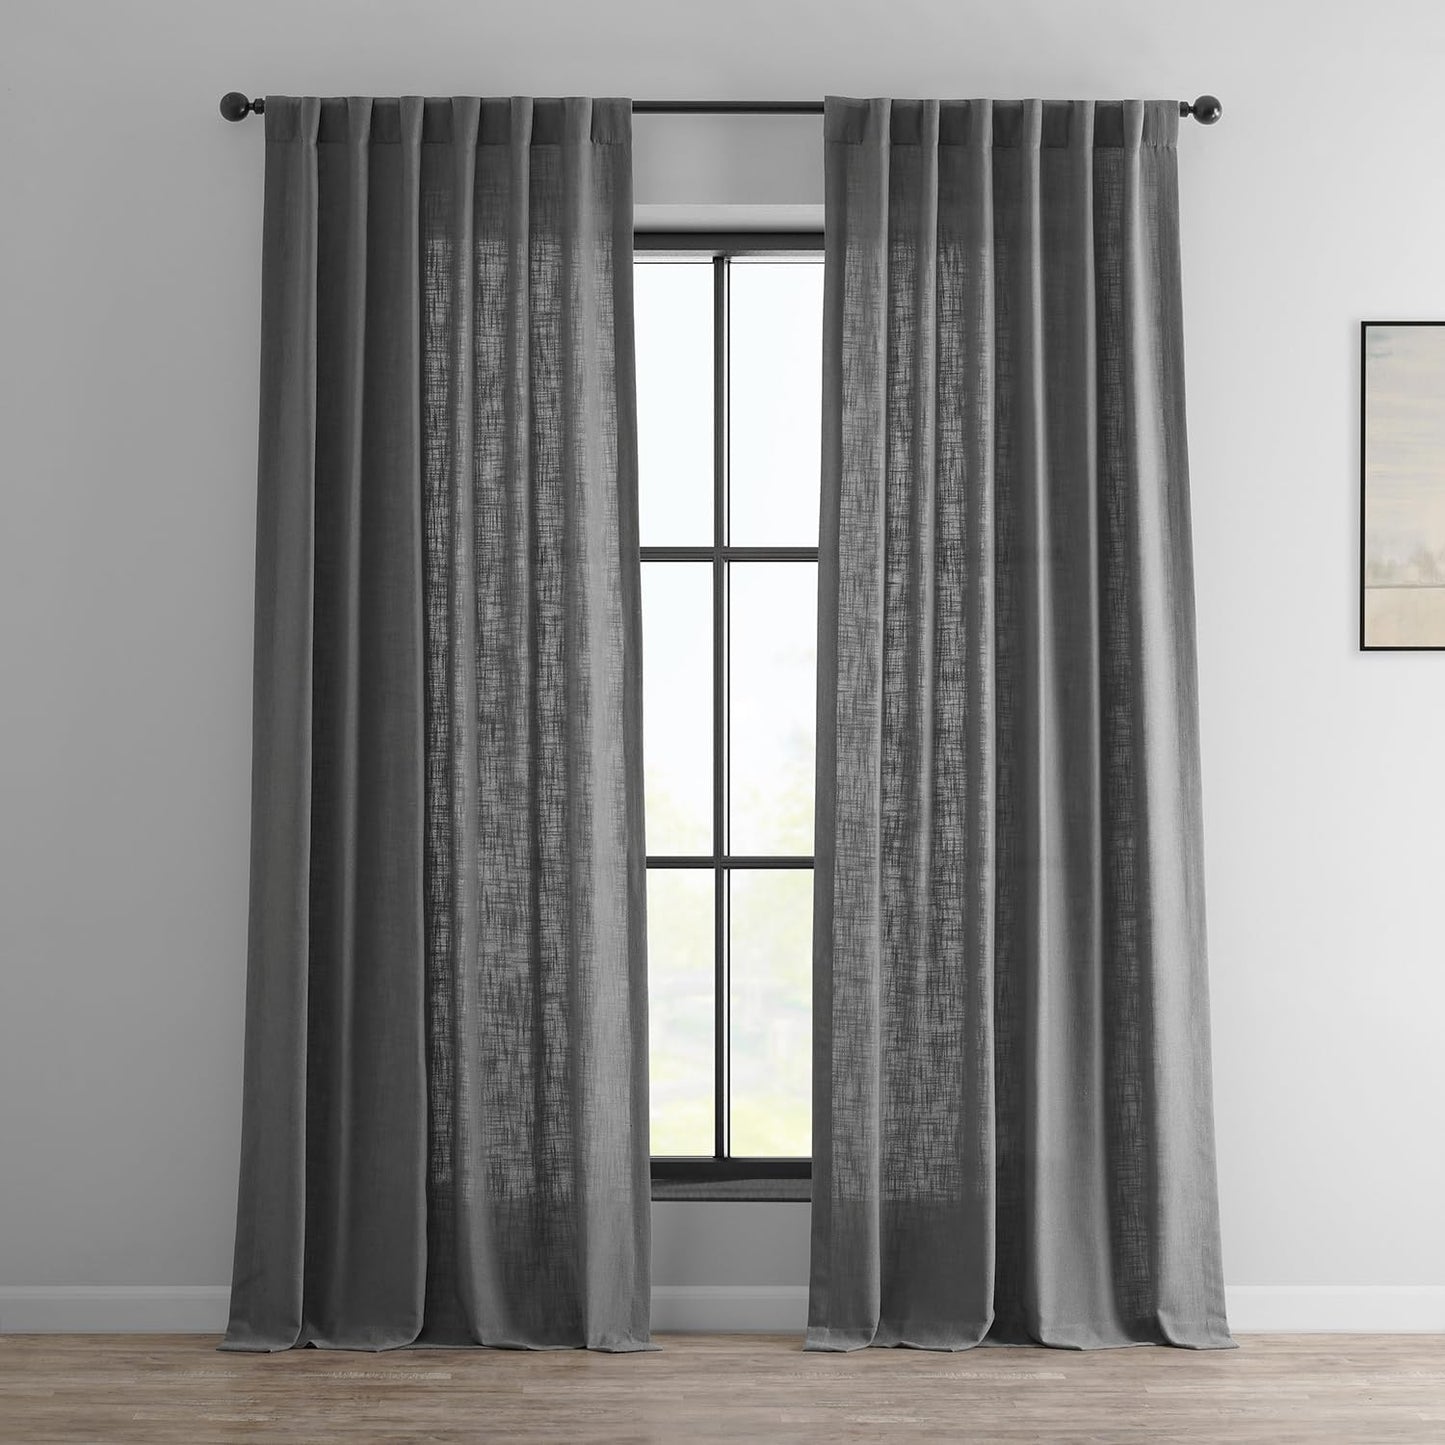 HPD Half Price Drapes Semi Sheer Faux Linen Curtains for Bedroom 96 Inches Long Light Filtering Living Room Window Curtain (1 Panel), 50W X 96L, Rice White  EFF Pewter Grey 50W X 120L 